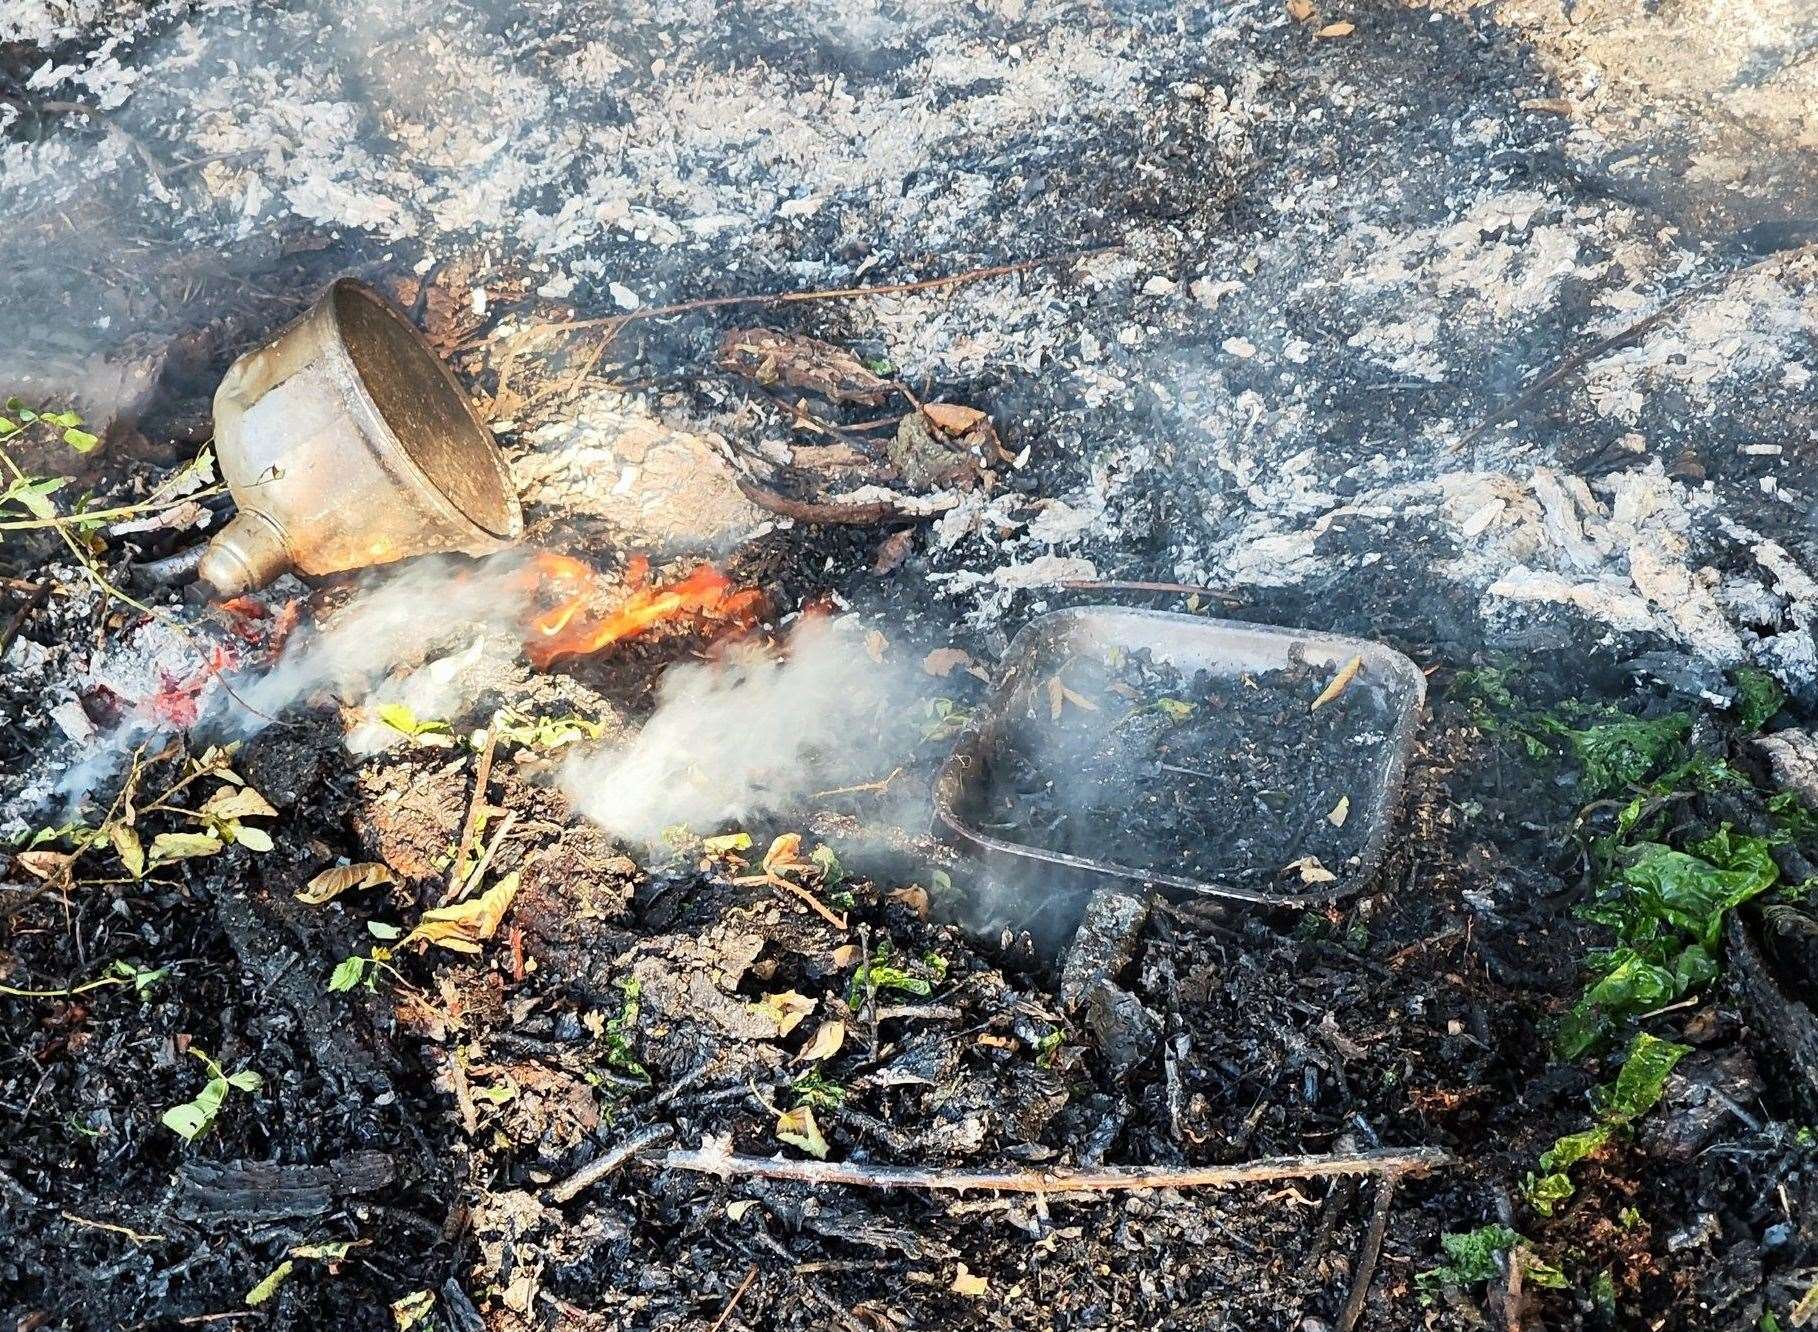 Firefighters attended a number of fires last year where barbecues were involved. Image: Hampshire & Isle of Wight Fire Service.